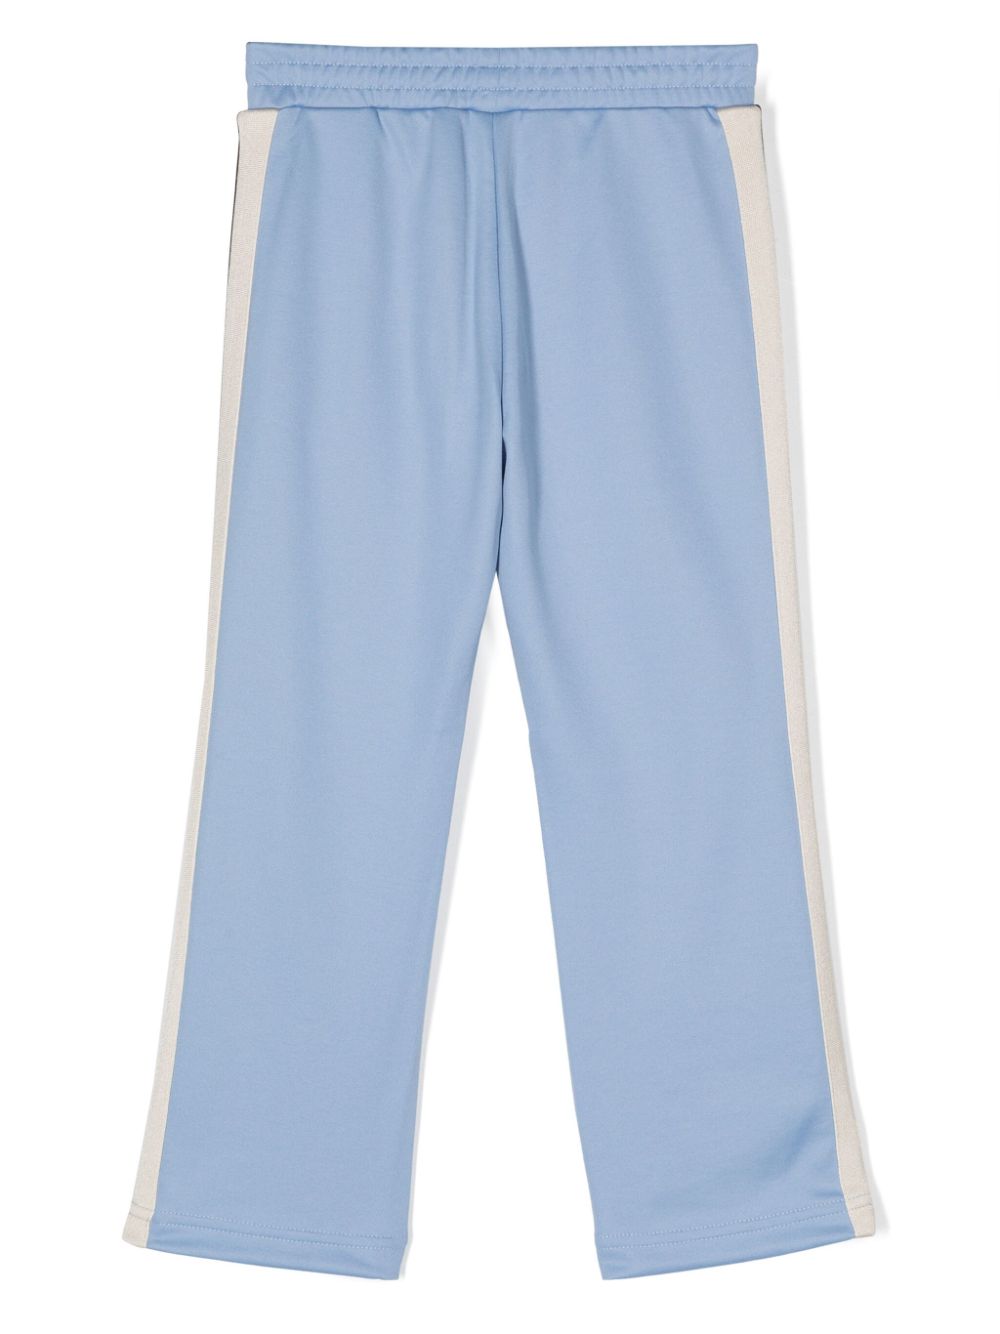 Light blue trousers for boys with logo